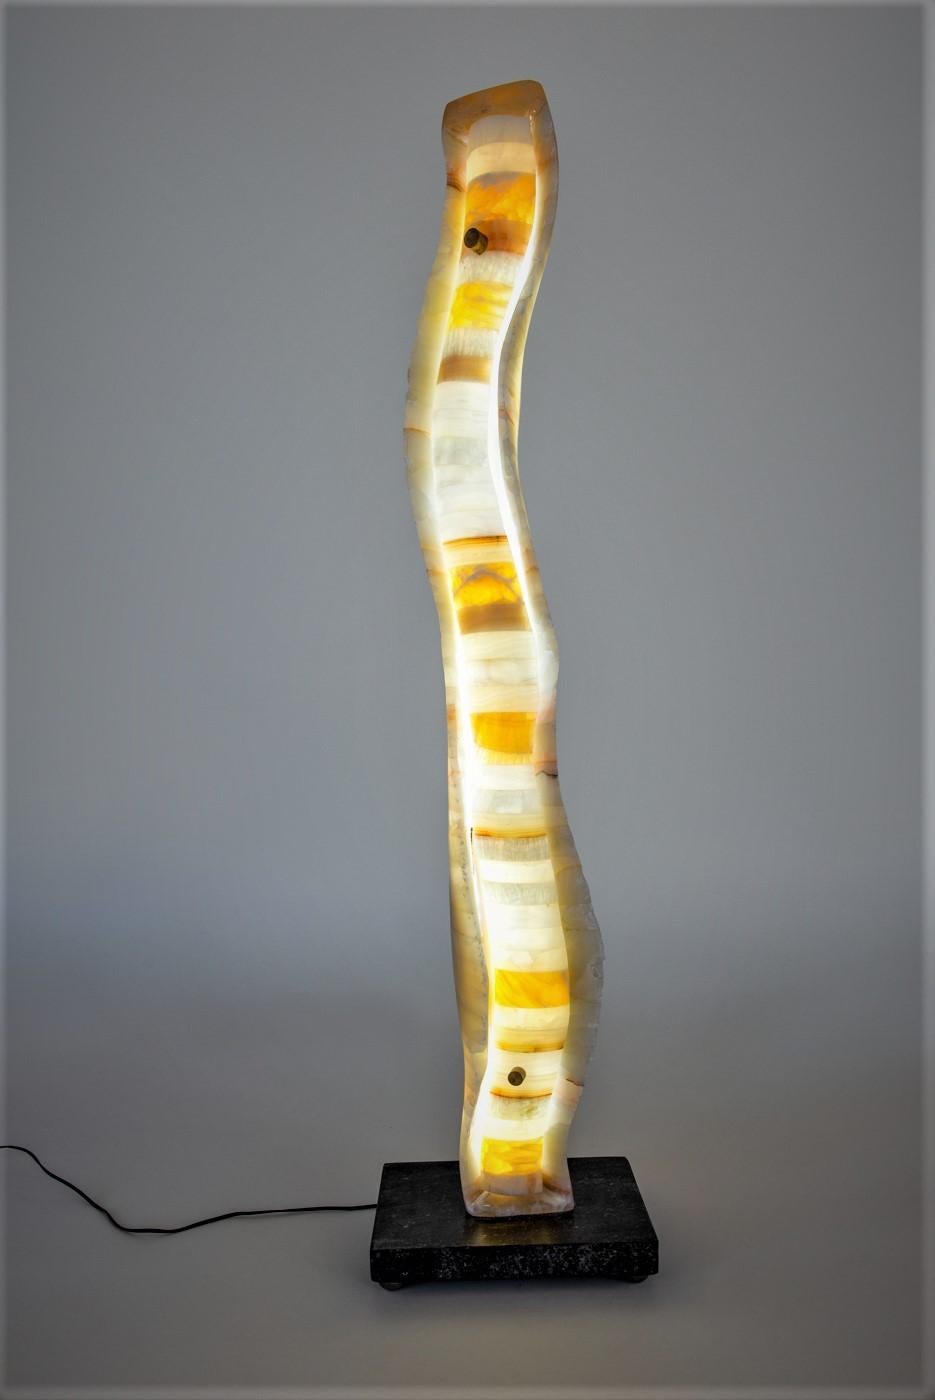 Illuminated sculpture composed of laminated alabaster using an additive (laminated) rather than the more traditional subtractive process of carving from a single block of stone. Individual prefabricated pieces of alabaster are glued together using